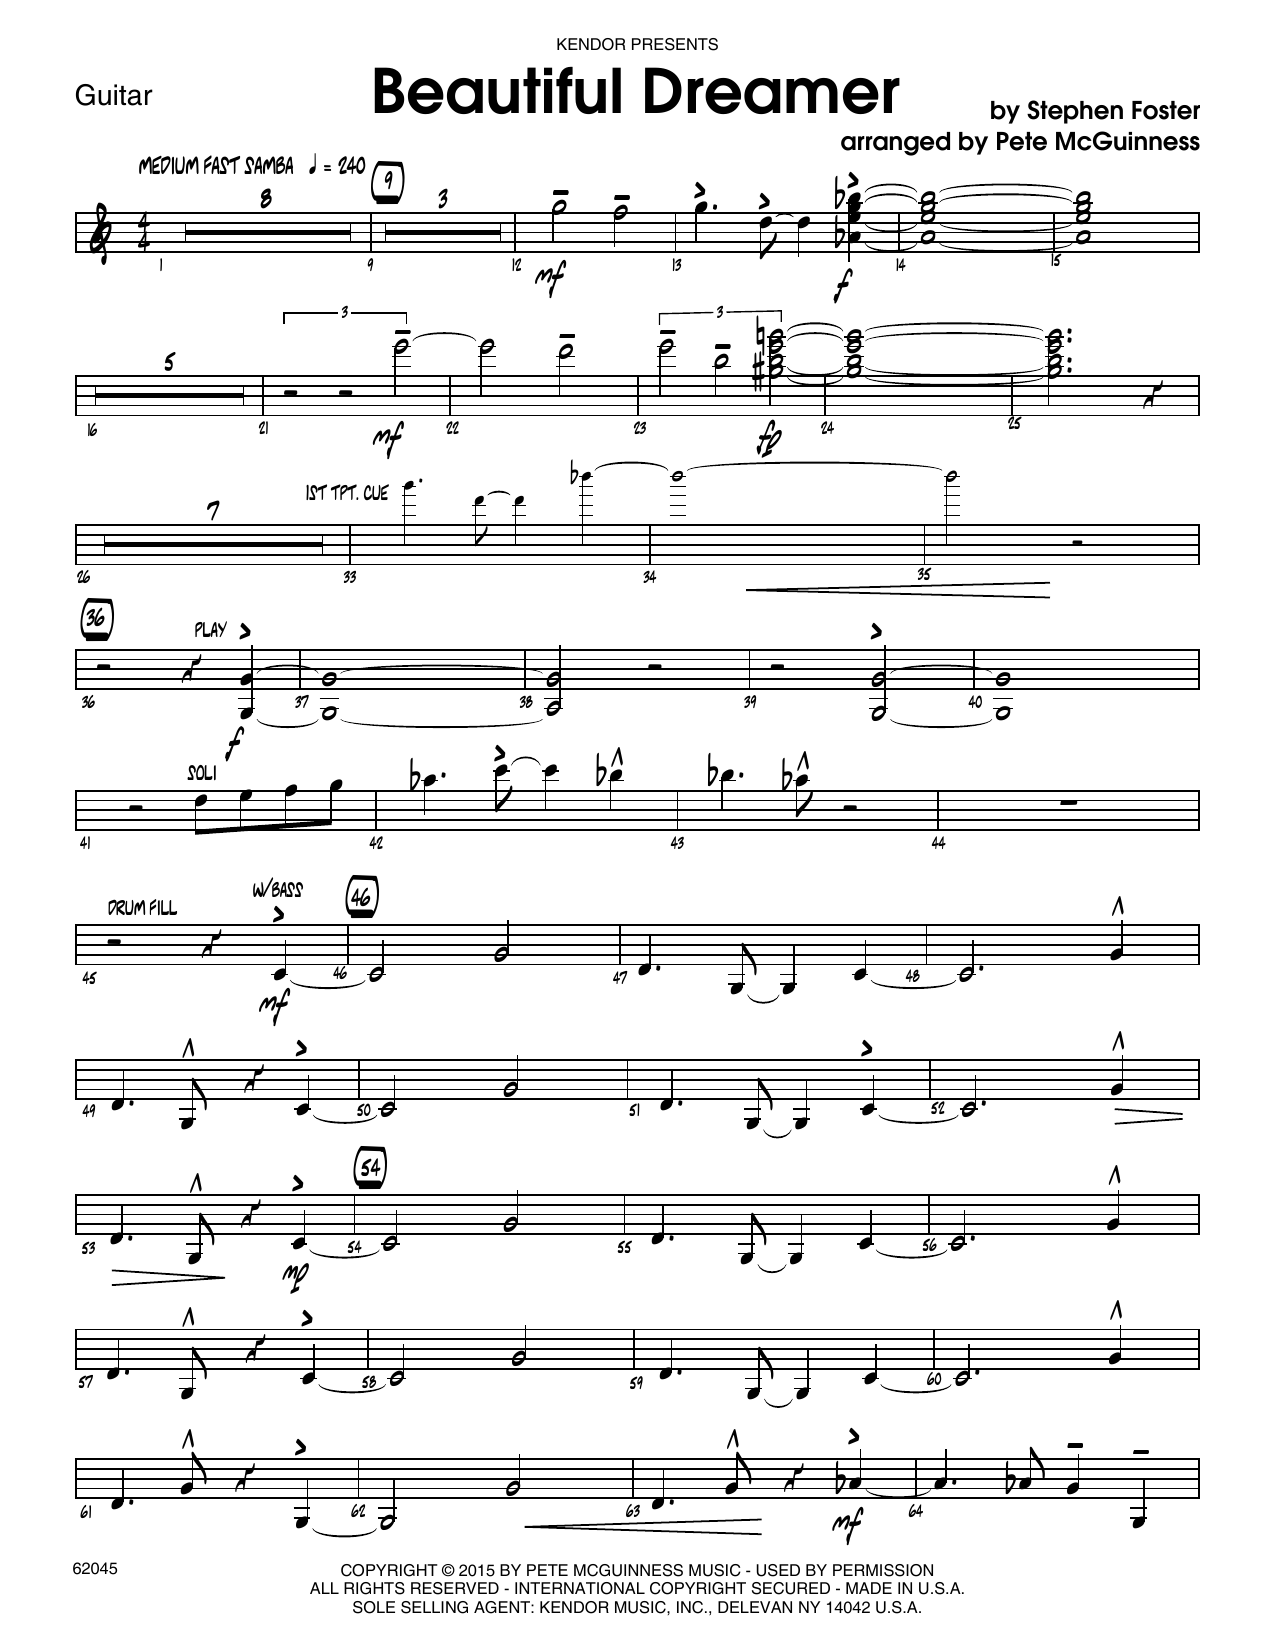 Stephen Foster Beautiful Dreamer - Guitar sheet music preview music notes and score for Jazz Ensemble including 7 page(s)